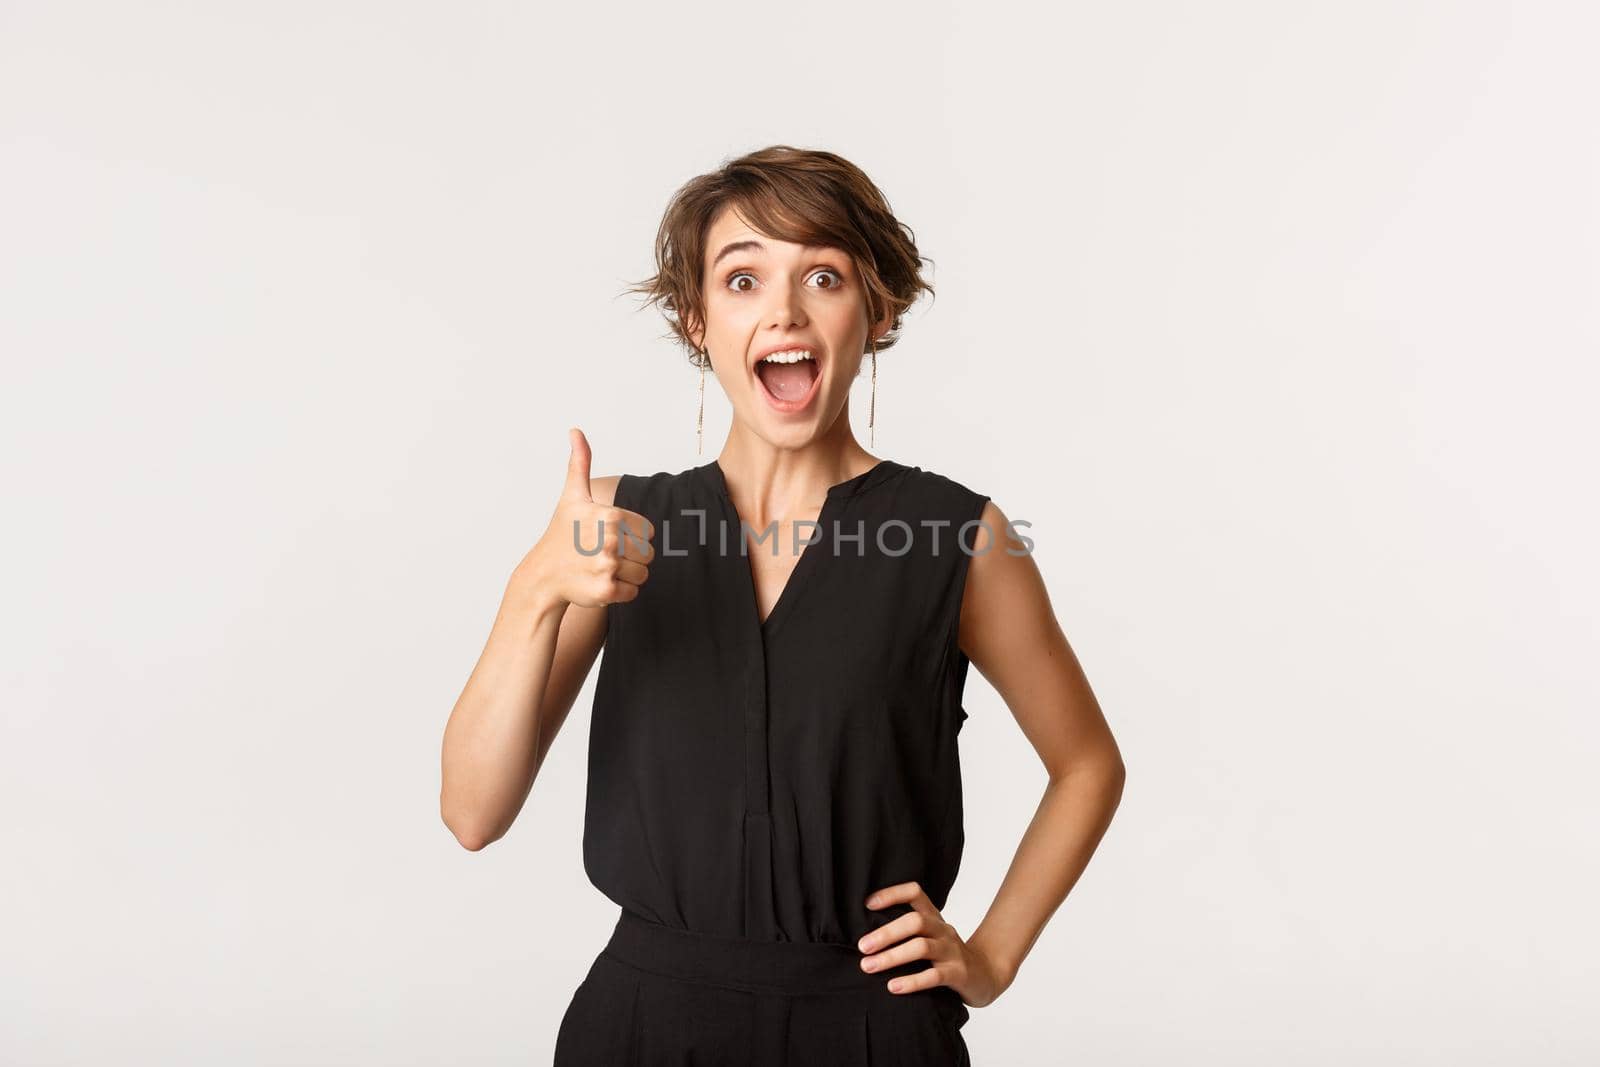 Amazed and satisfied young woman showing thumbs-up with excited face, standing white background.